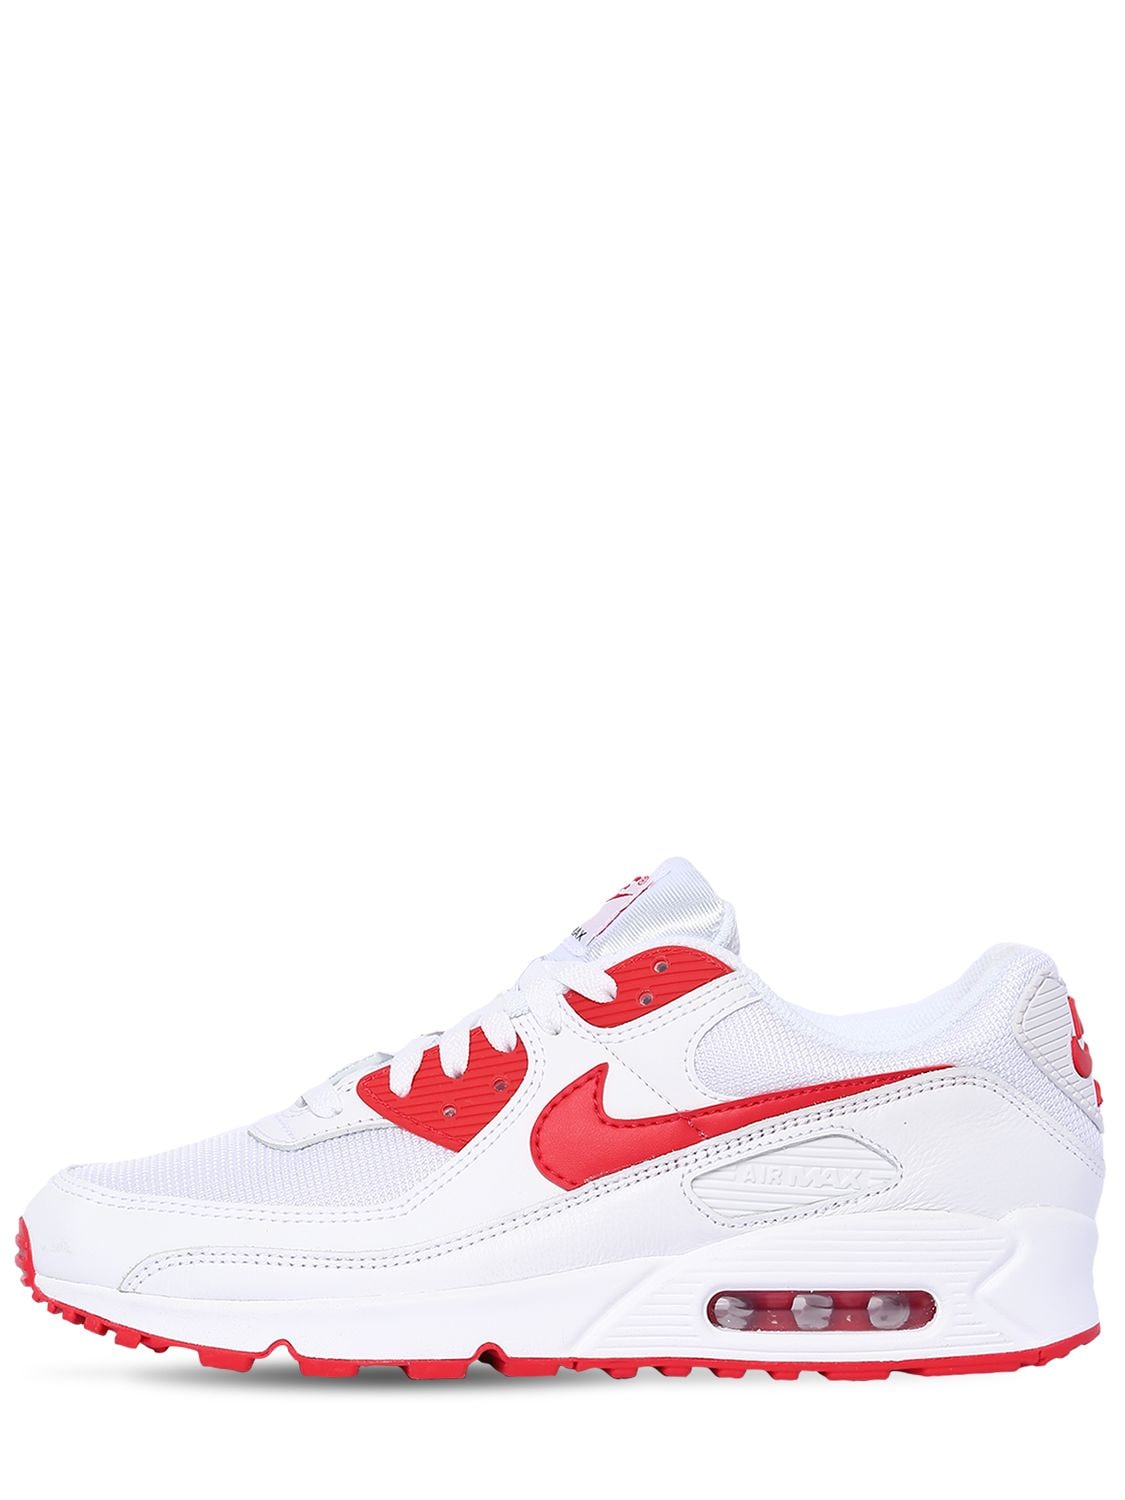 Nike Air Max 90 Sneakers In White,hyper Red